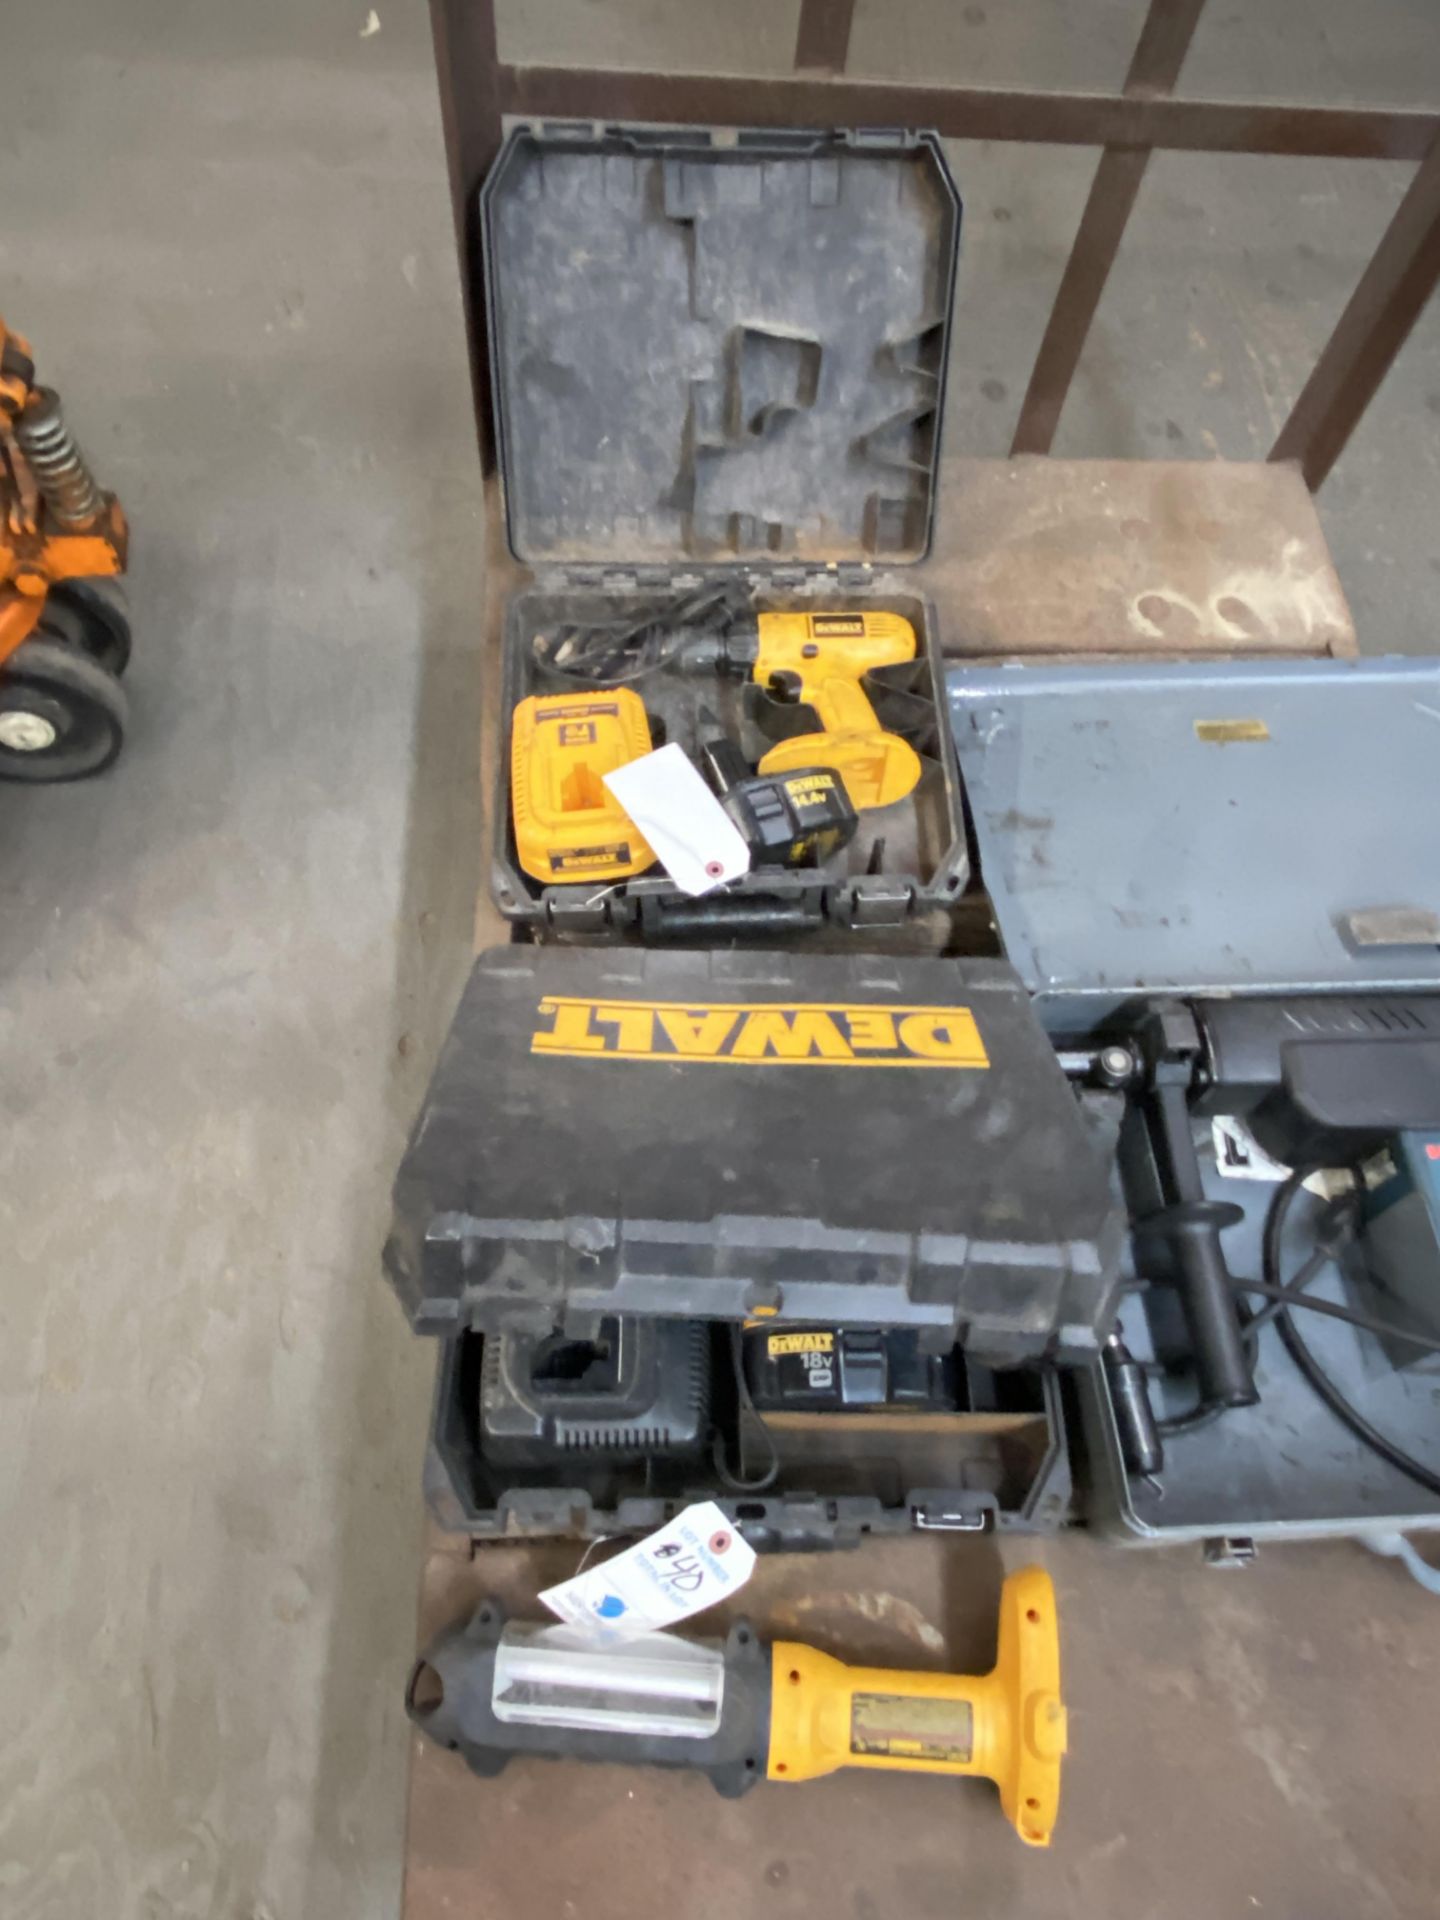 DeWalt Battery Powered Drill & 18v Heavy Duty 1/2" Impact Gun Both w/ Case & Chargers w/ 4 Batteries - Image 4 of 4